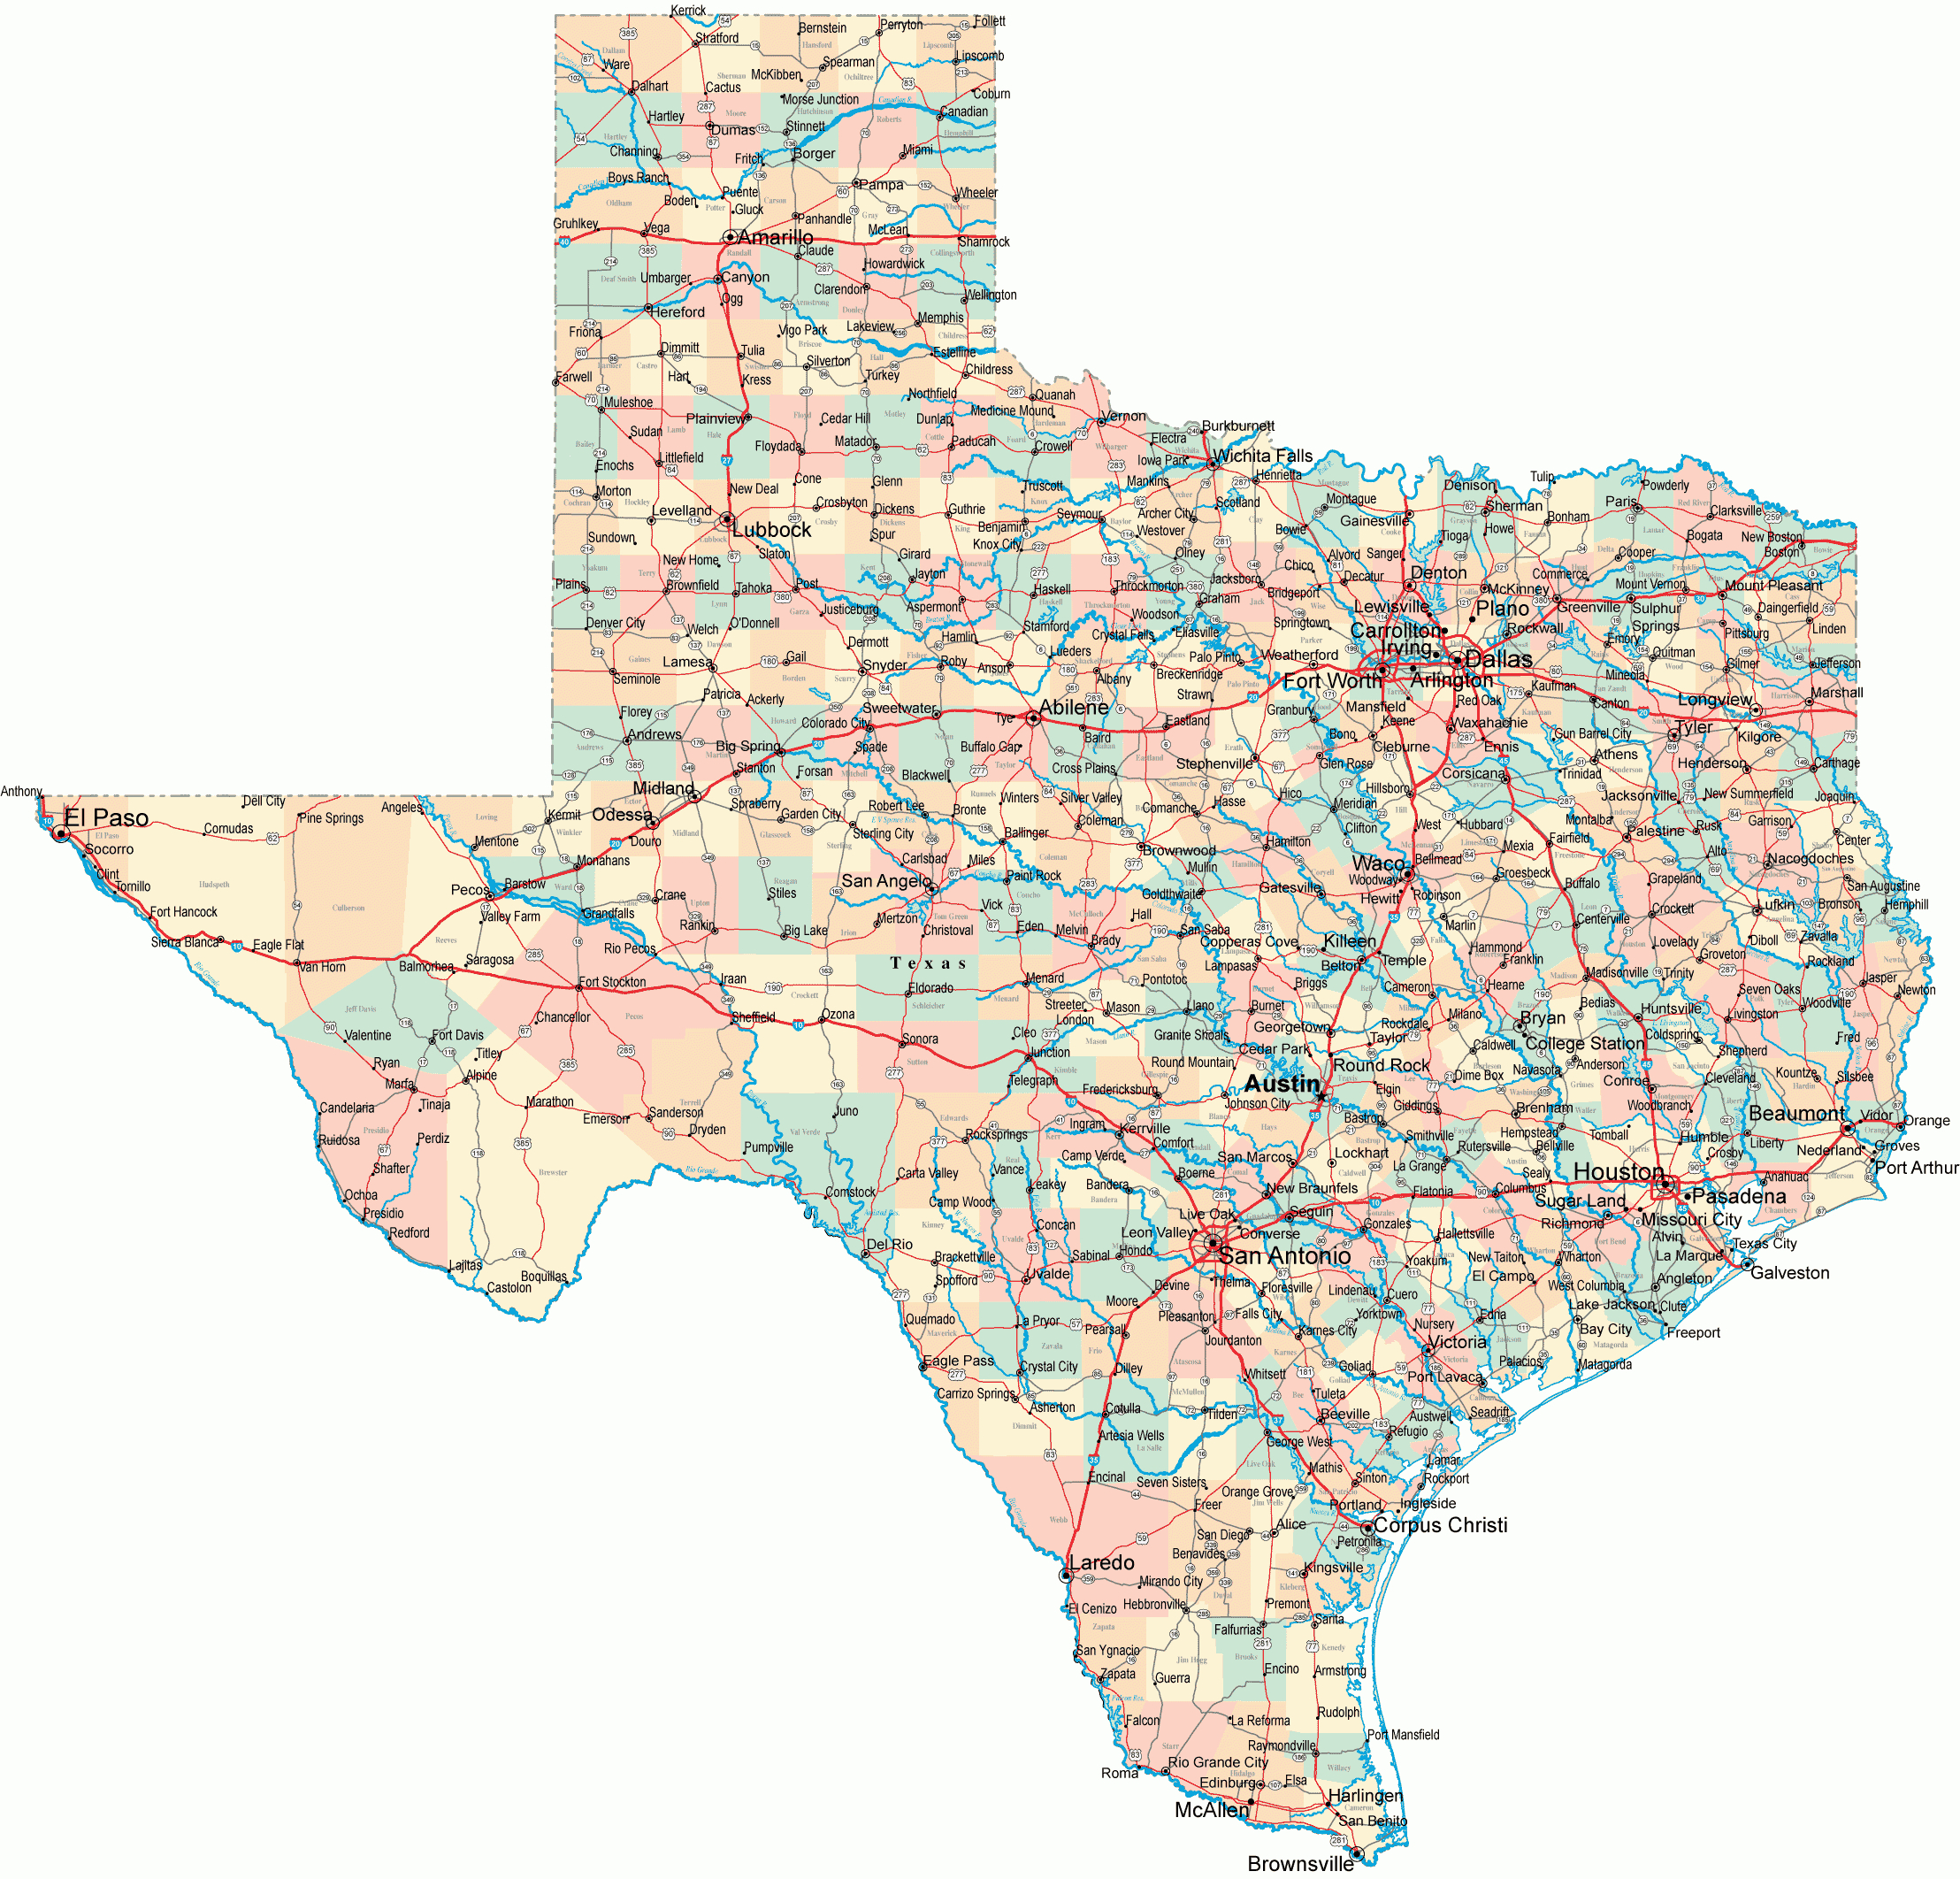 Texas Road Map - Tx Road Map - Texas Highway Map - Texas Road Map With Cities And Towns